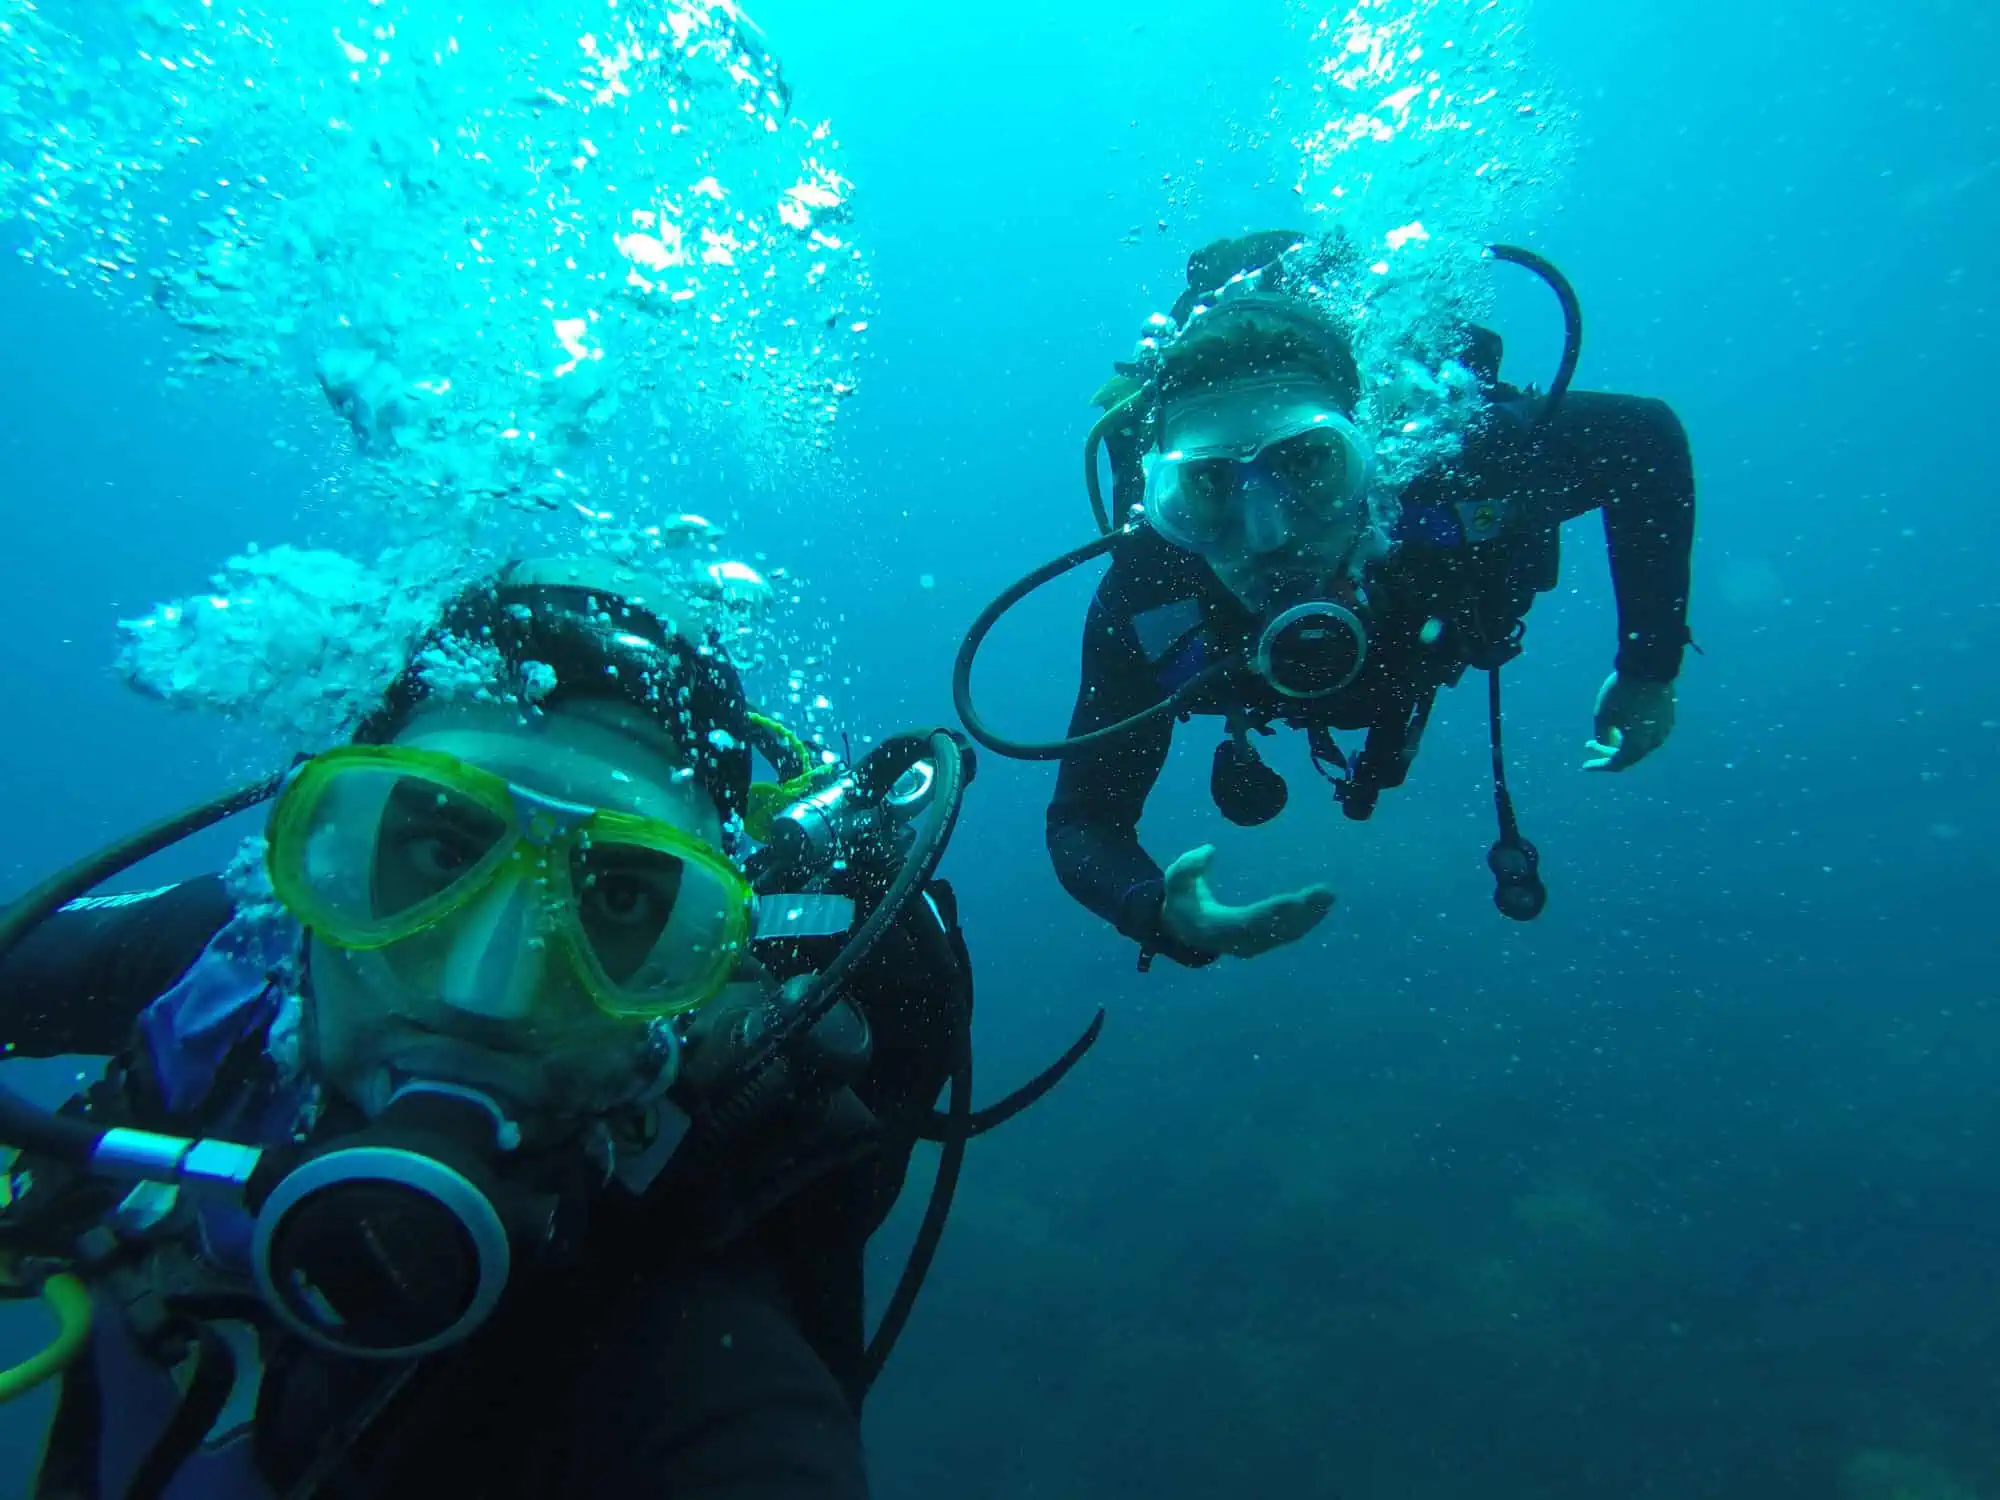 Two scuba divers underwater wearing diving masks and gear, surrounded by bubbles, in blue water.